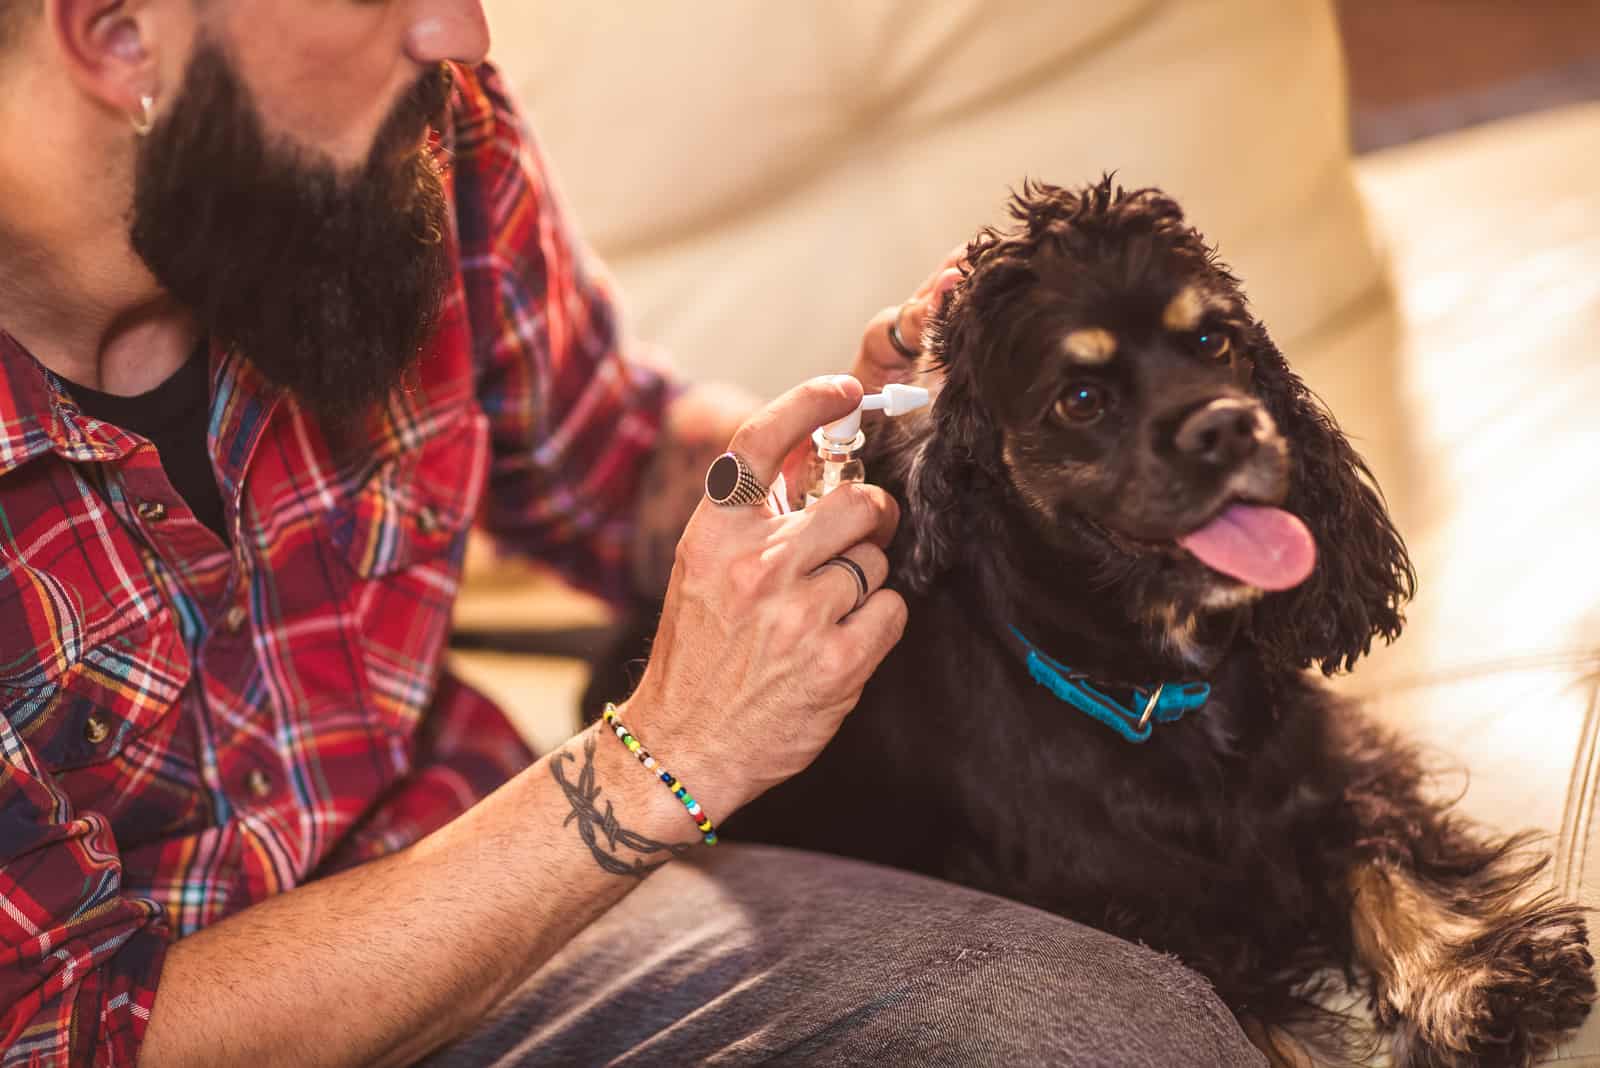 Black Gunk In Dog Ear: What Causes It And How To Solve It